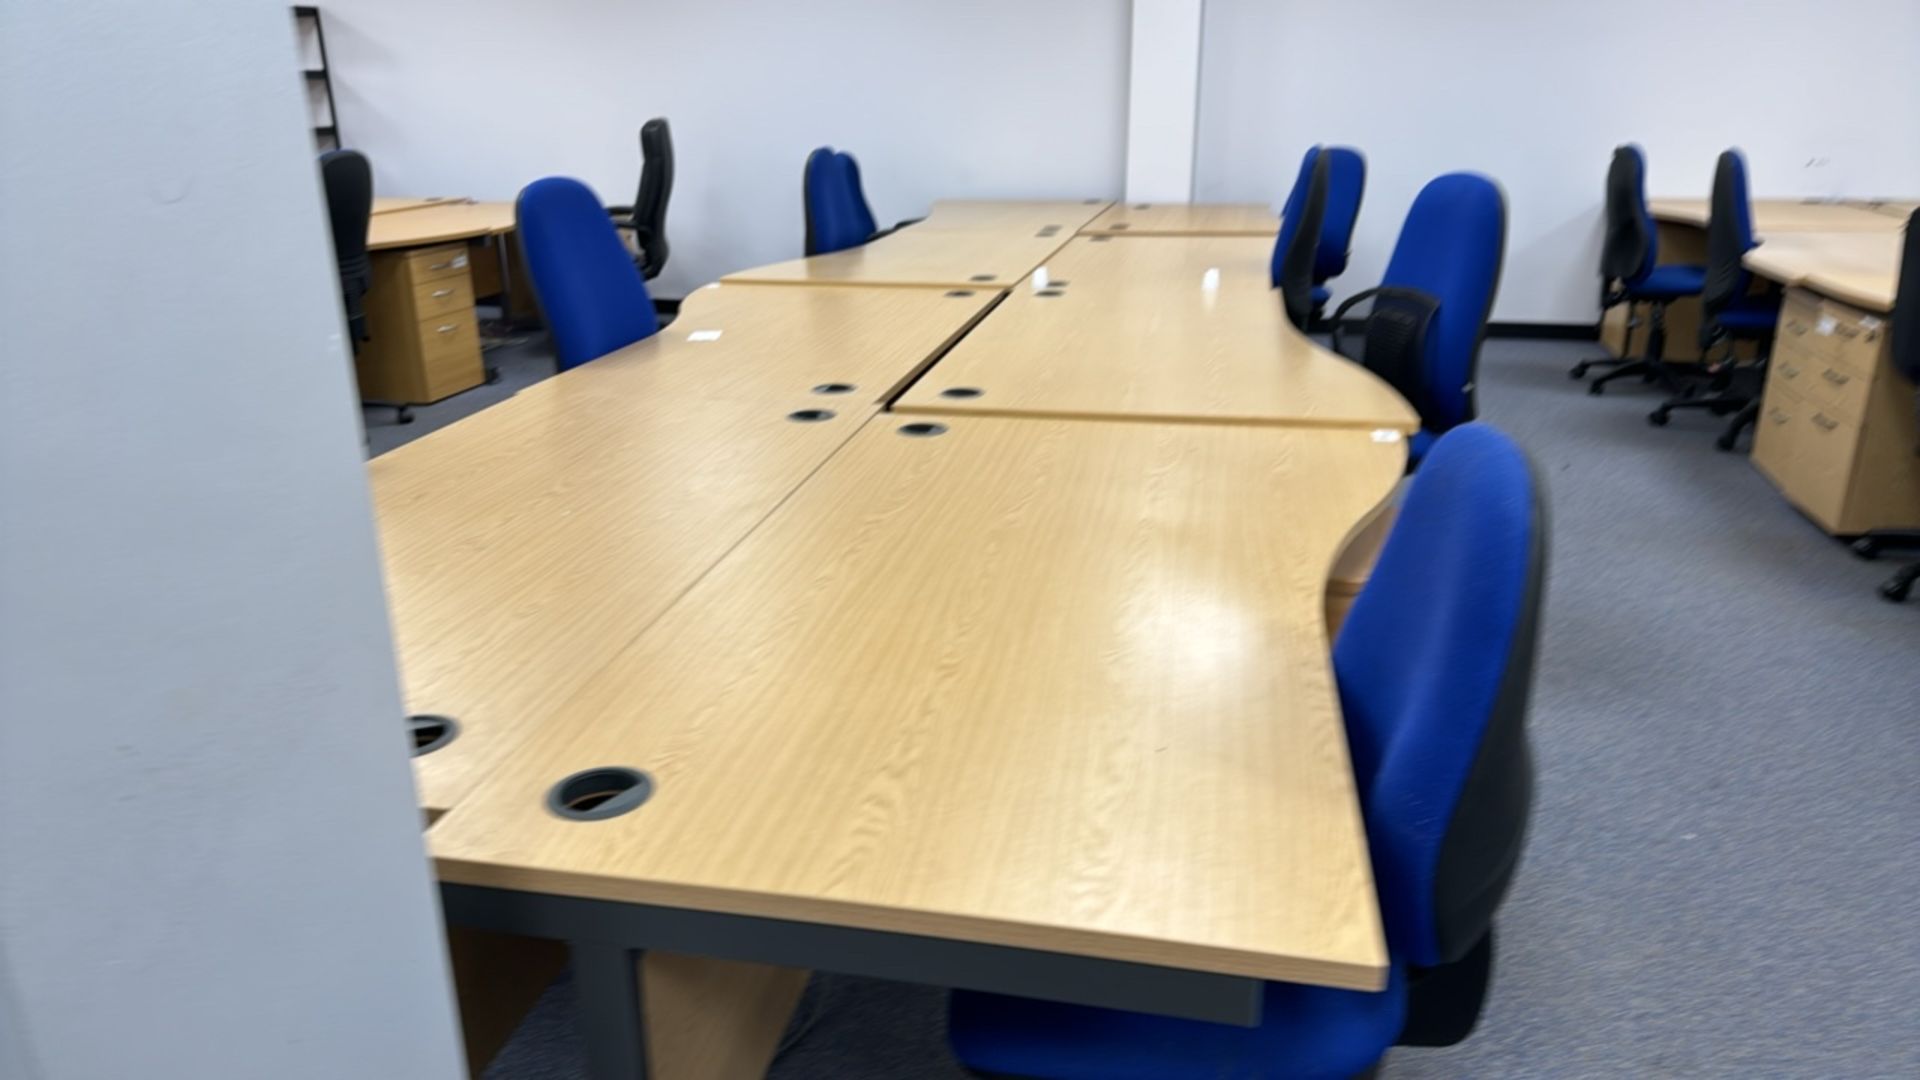 Wooden Effect Office Desks x8 With Office Chairs x8 - Image 4 of 5